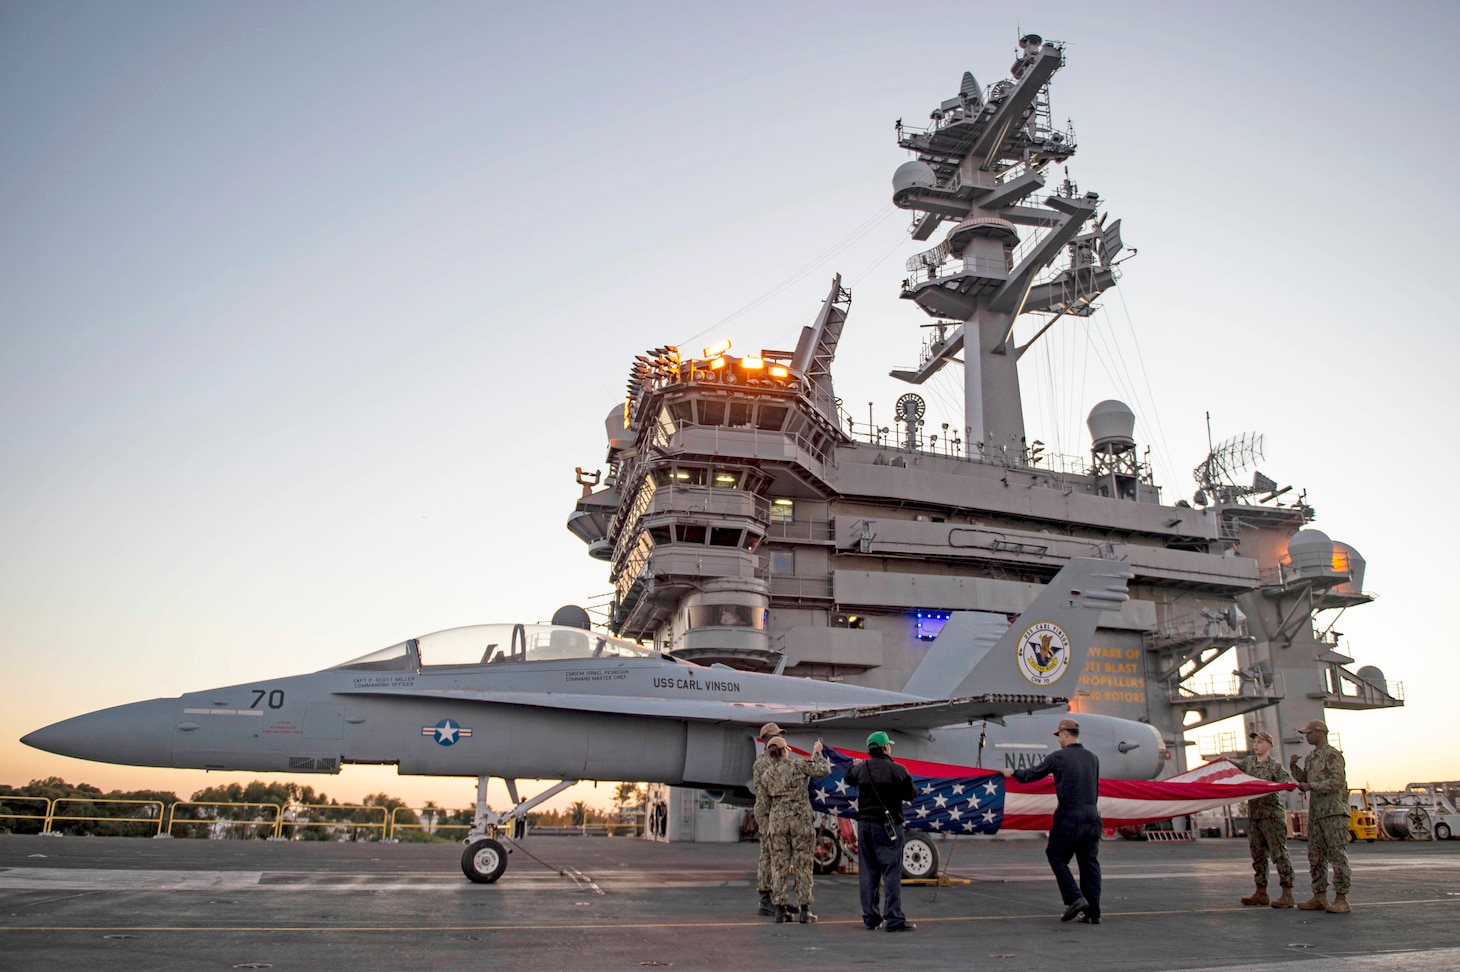 221116-N-OL611-1015 SAN DIEGO (Nov. 16, 2022) Sailors assigned to Nimitz-class aircraft carrier USS Carl Vinson (CVN 70) fold the national ensign after evening colors on the flight deck. Vinson is currently pierside in its homeport of San Diego. (U.S. Navy photo by Mass Communication Specialist 2nd Class Tyler Wheaton)